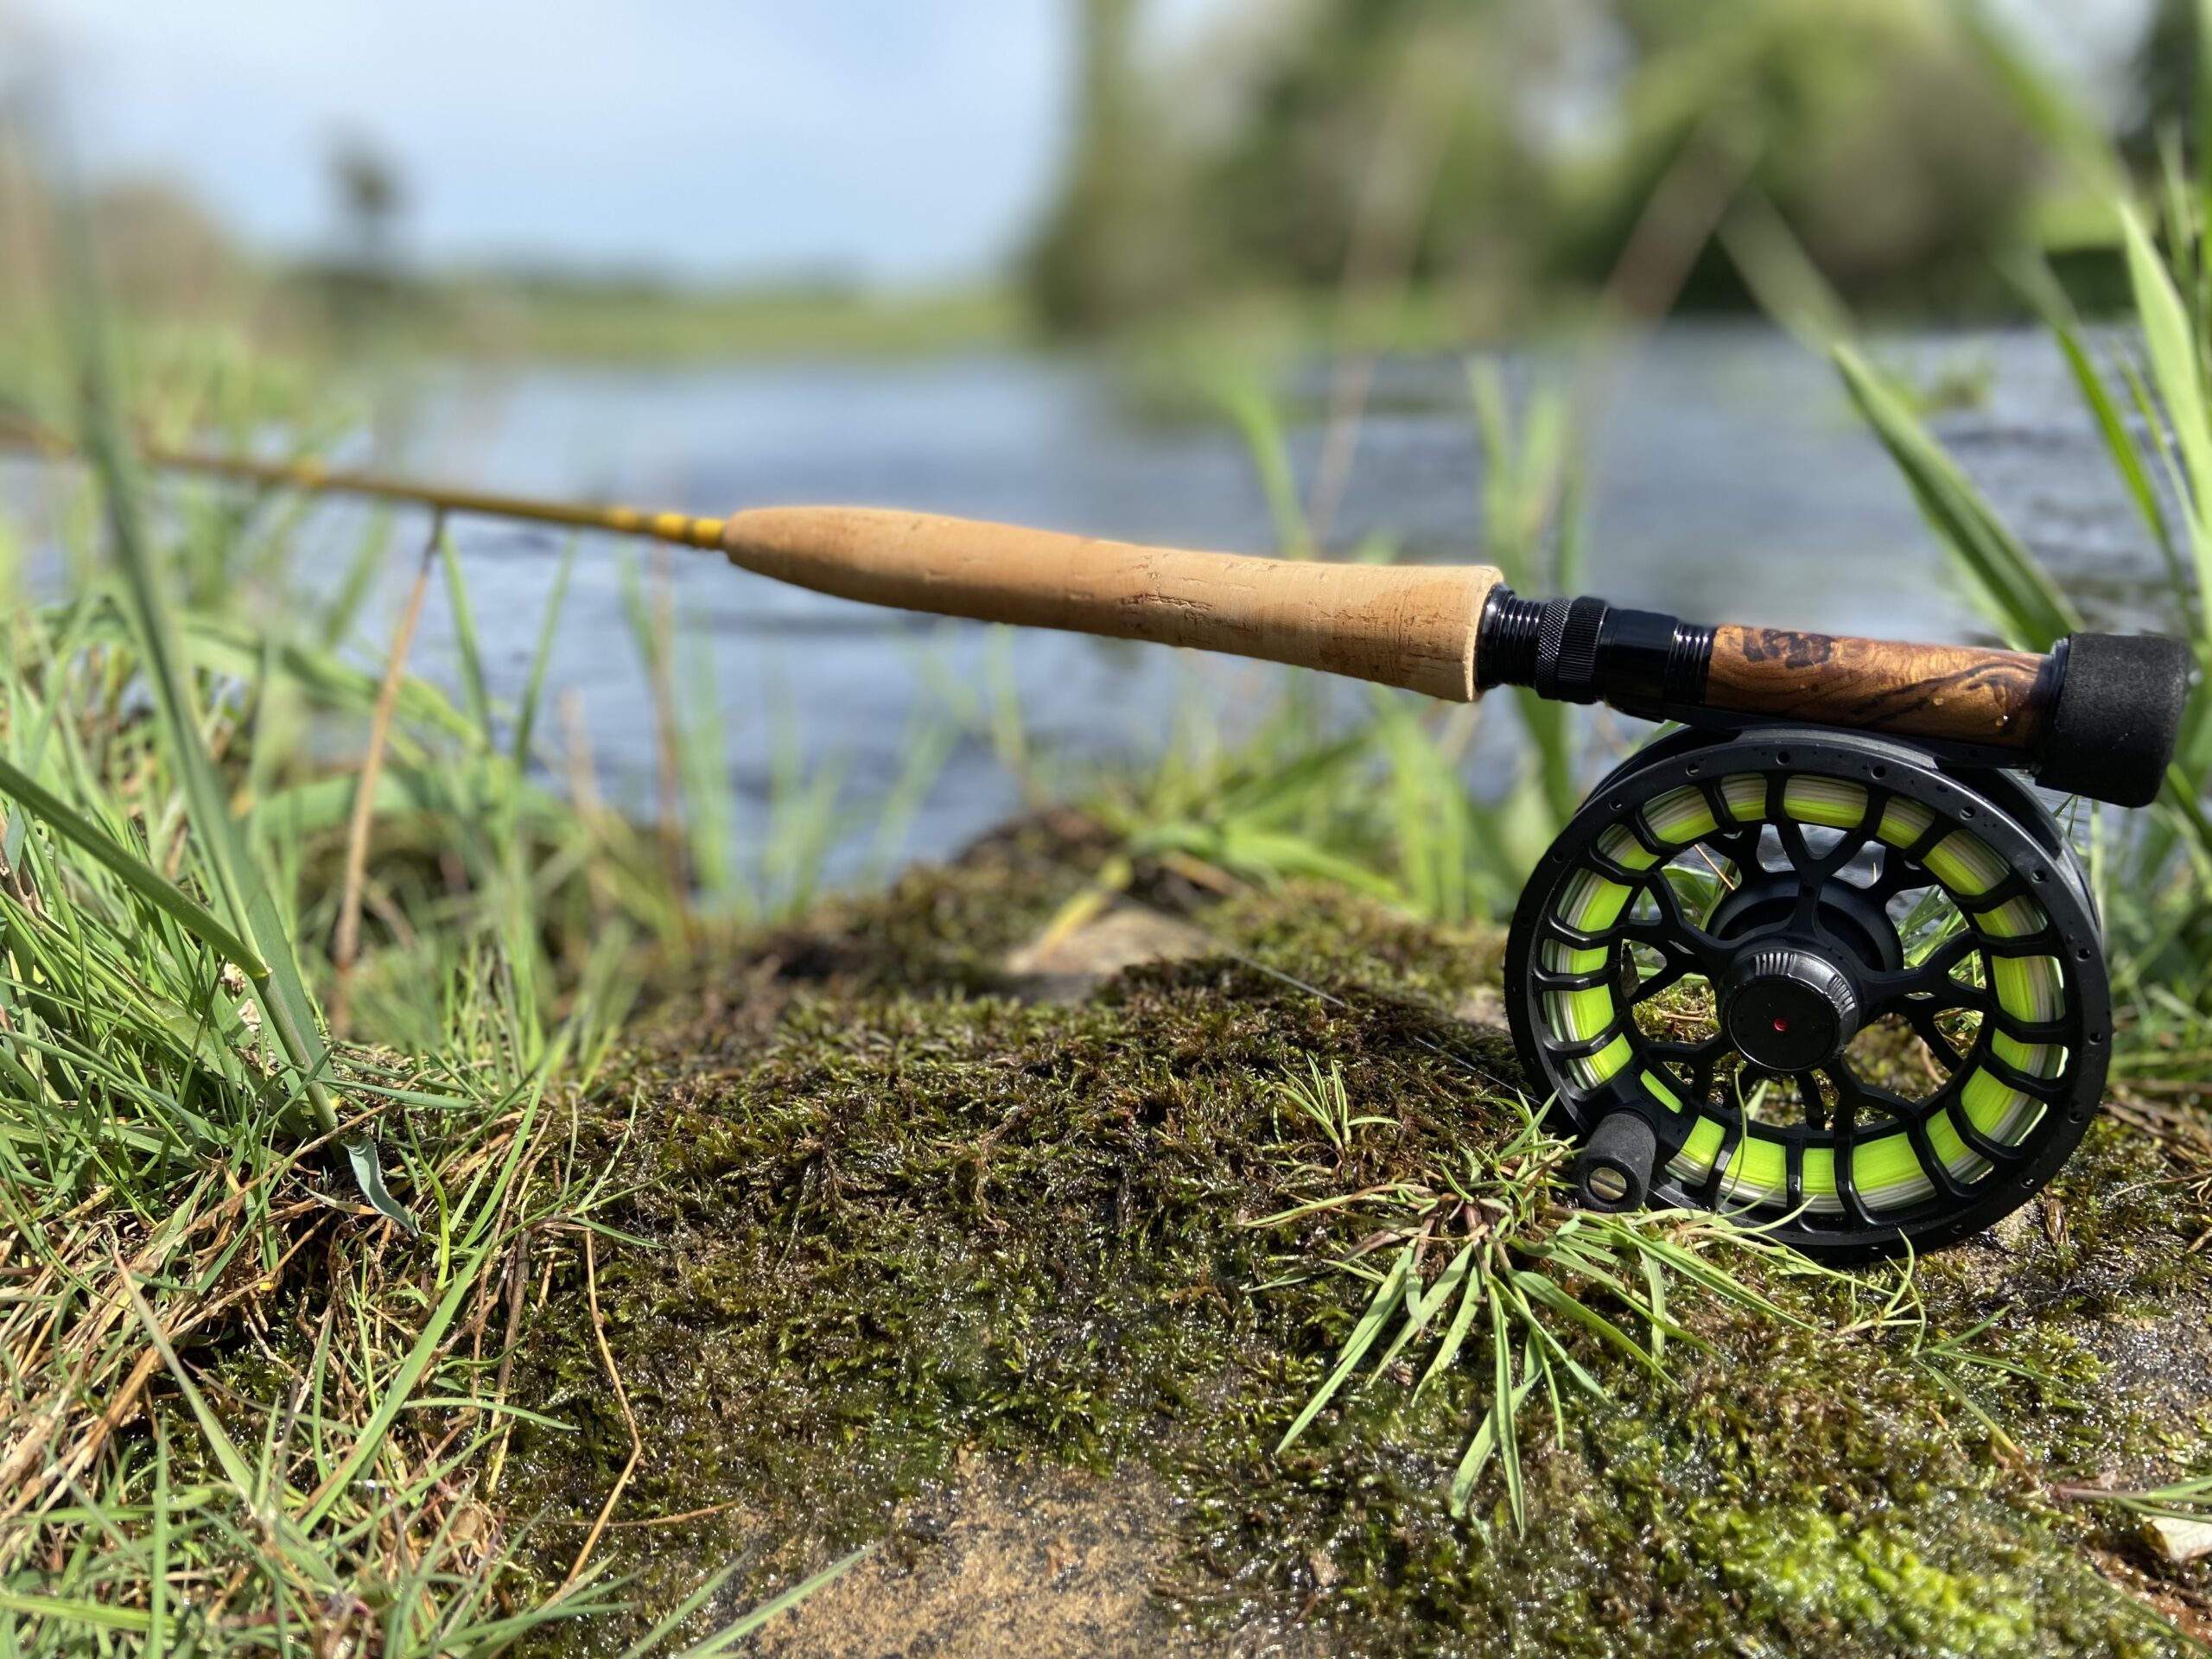 How To Choose A Fly Rod - A Buyer's Guide